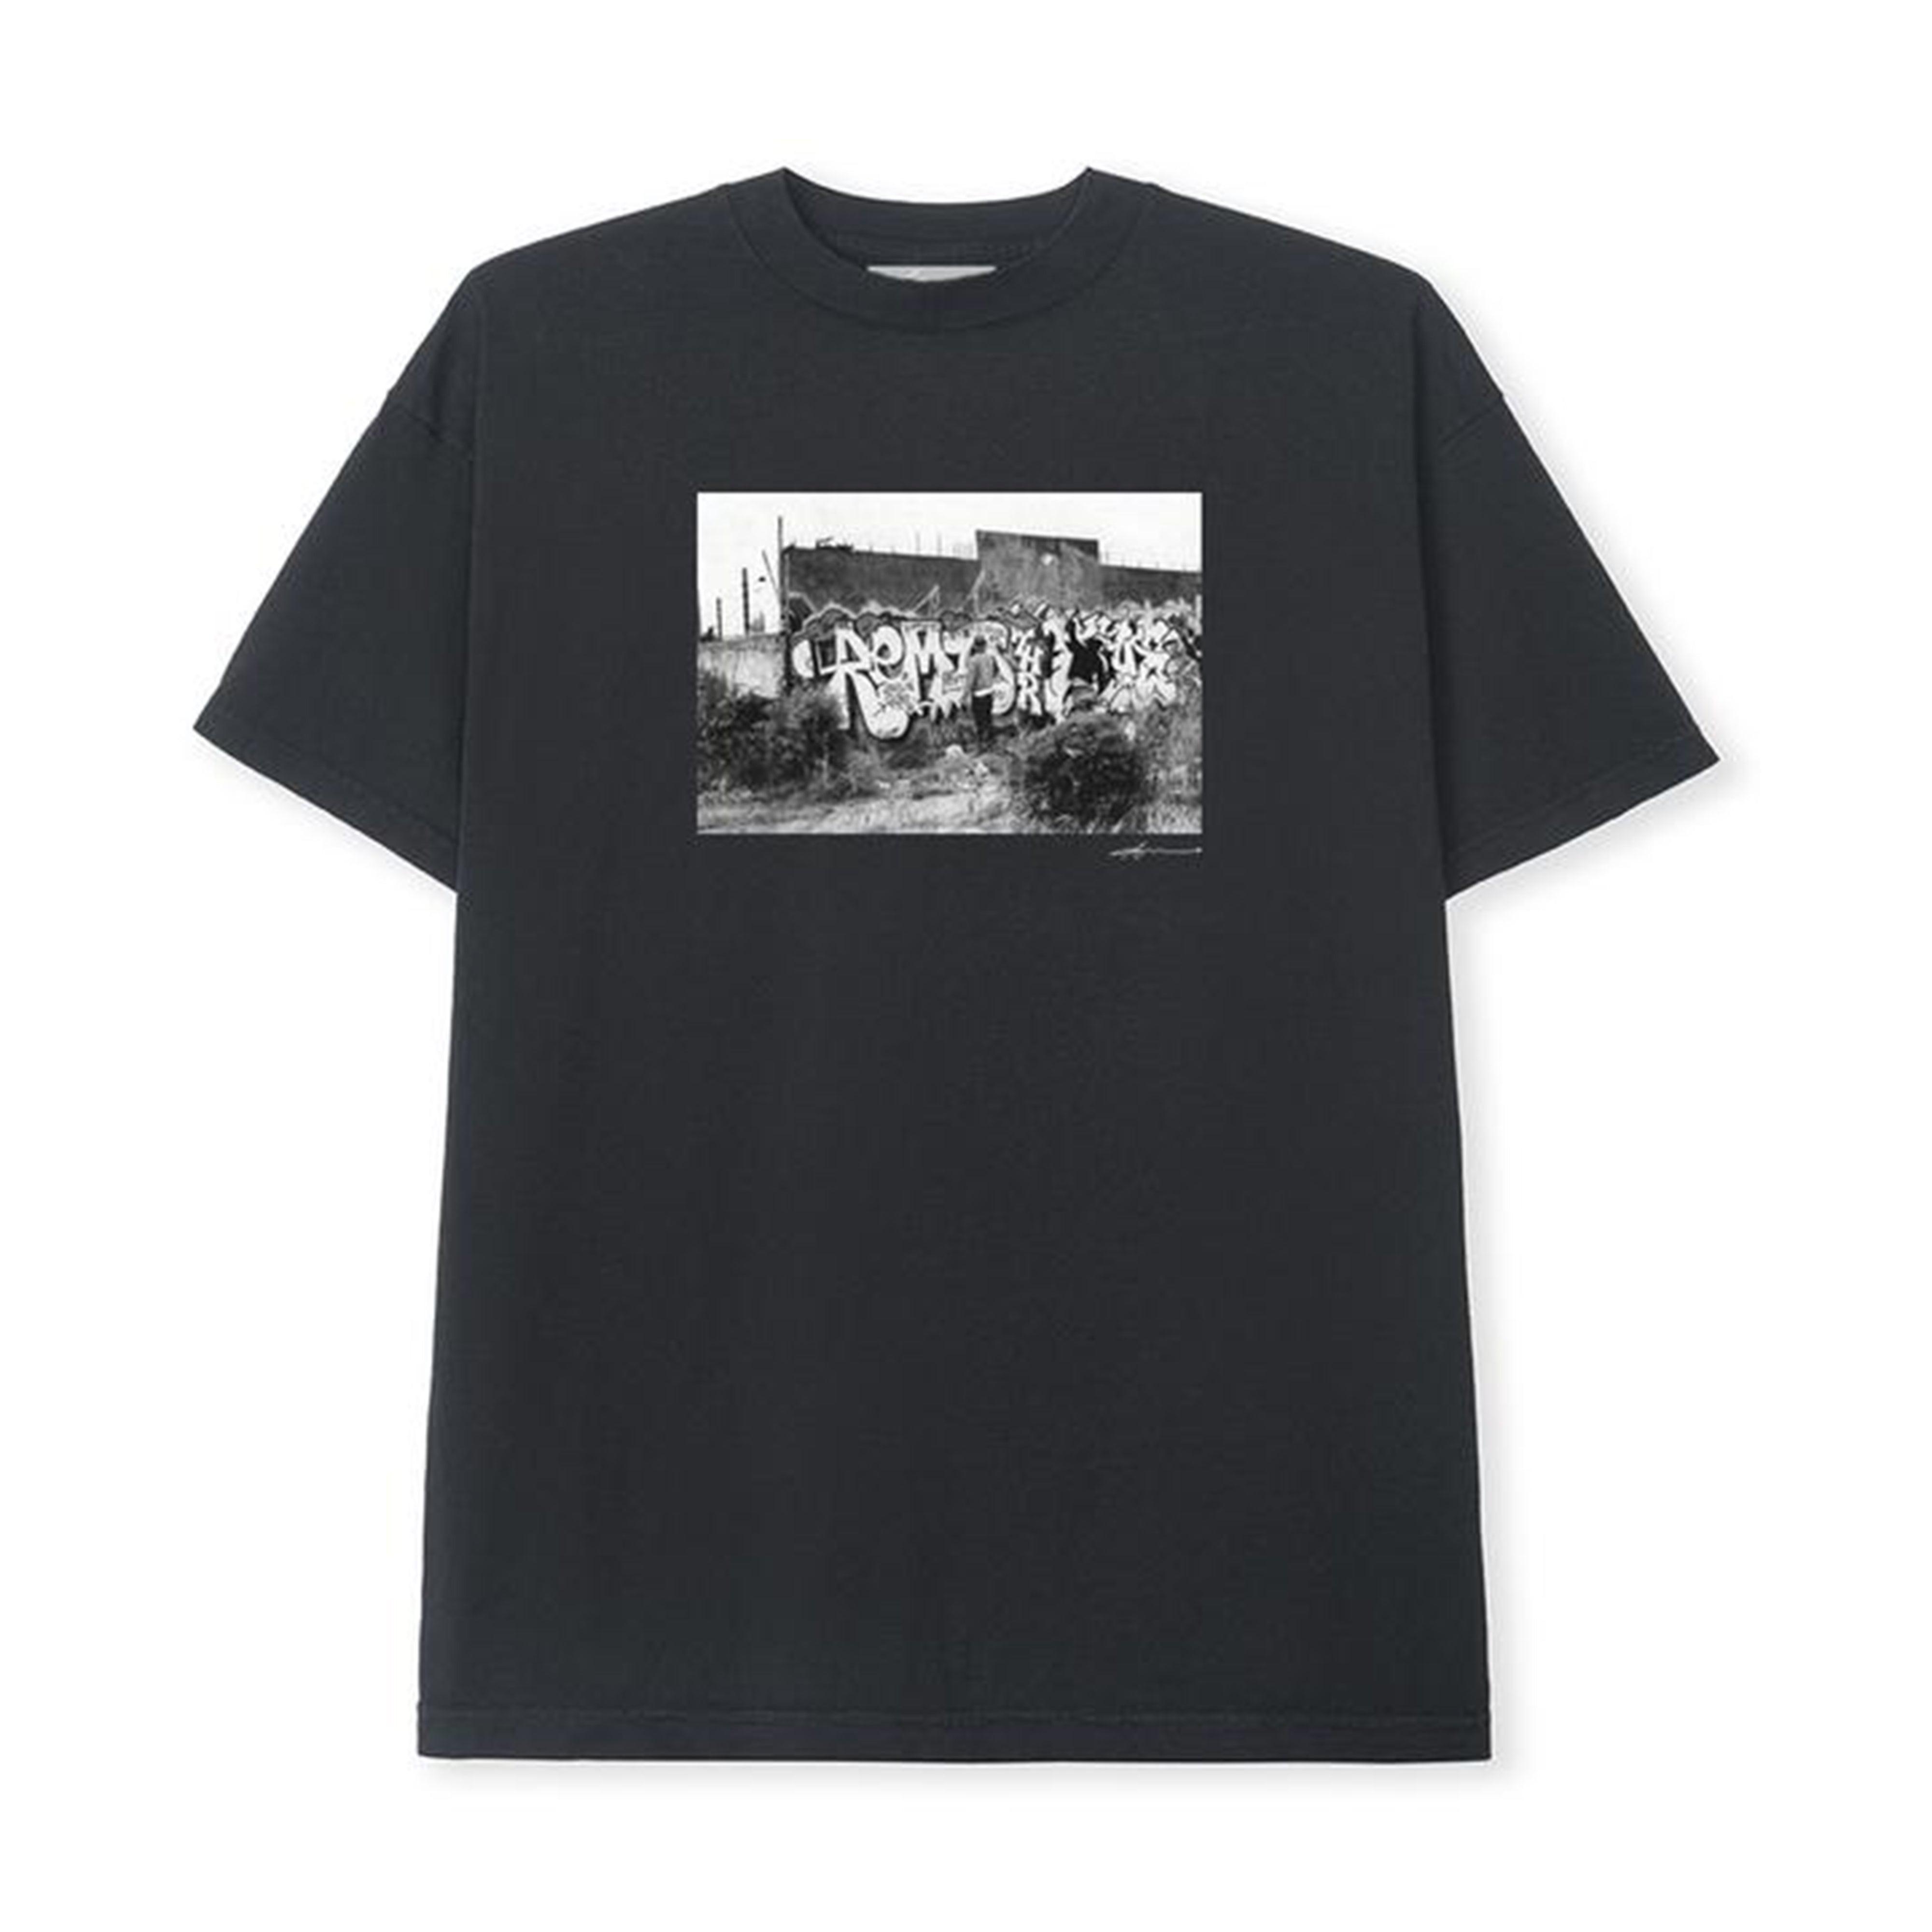 Ari Marcopoulos Hunter's Point T-Shirt (Black) by ARI MARCOPOULOS